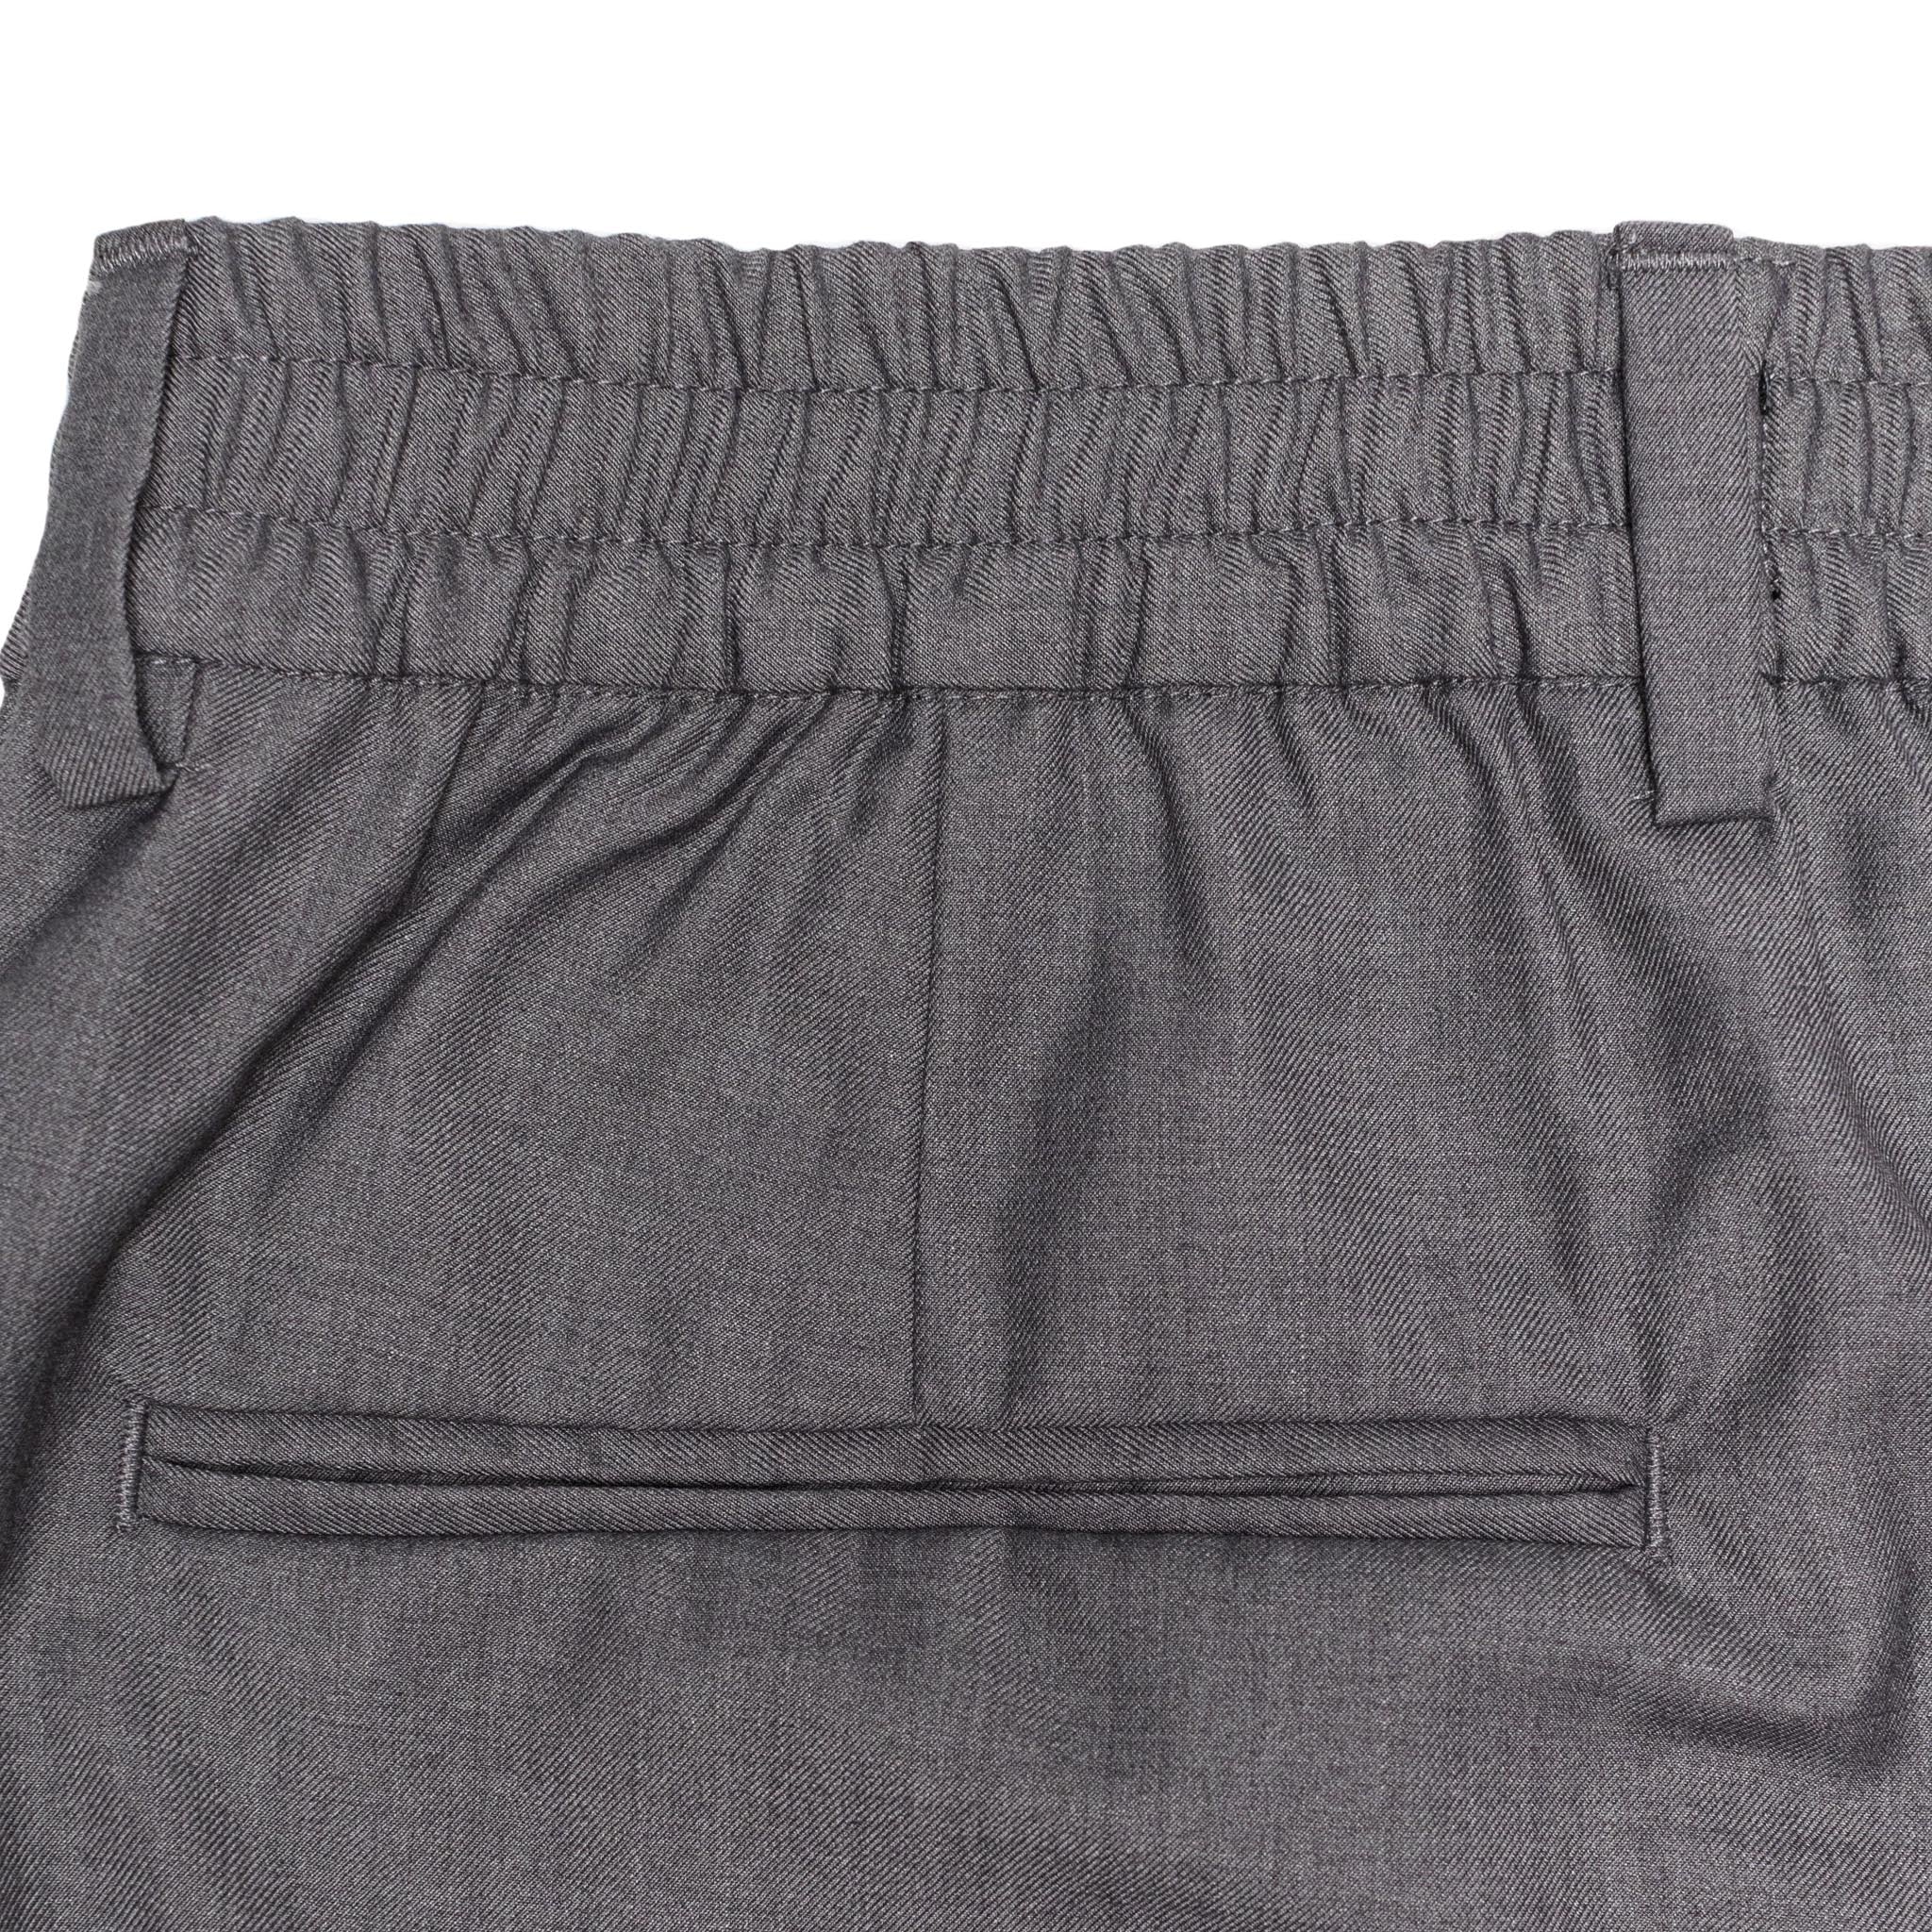 HOMME+ Pleated Loose Trouser Grey